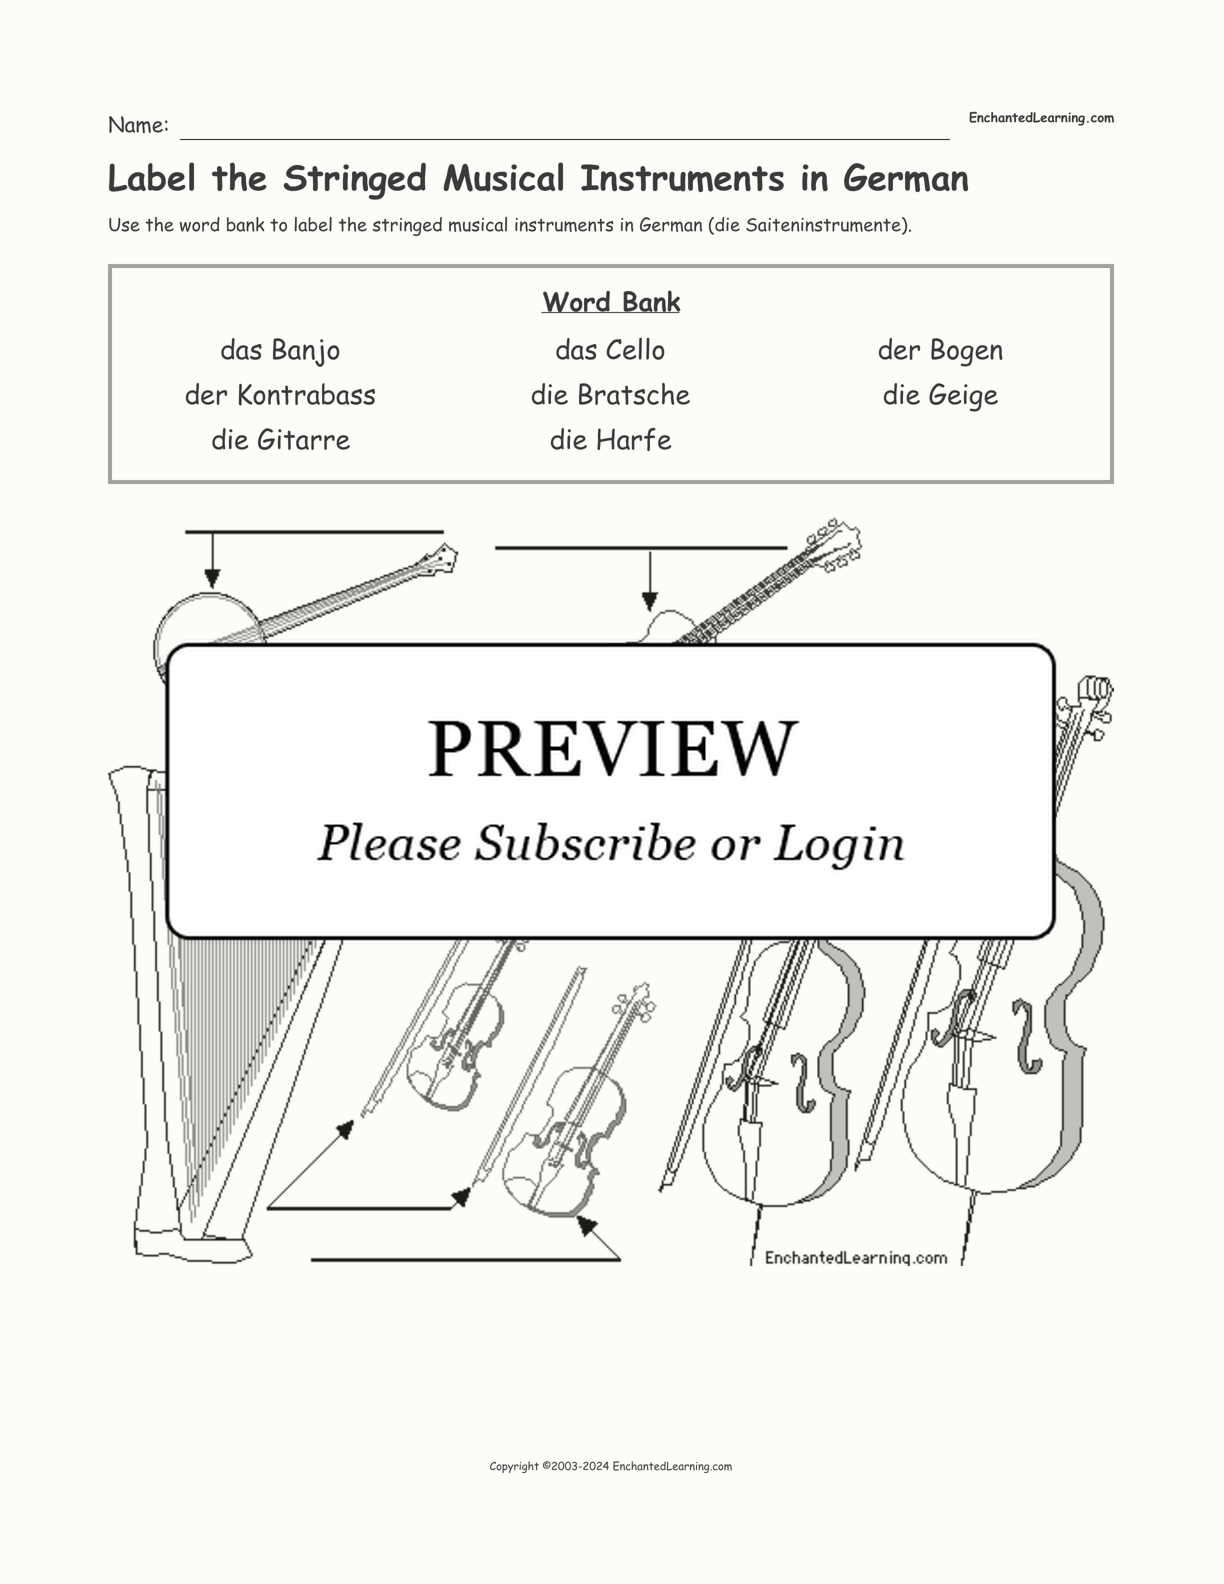 Label the Stringed Musical Instruments in German interactive worksheet page 1